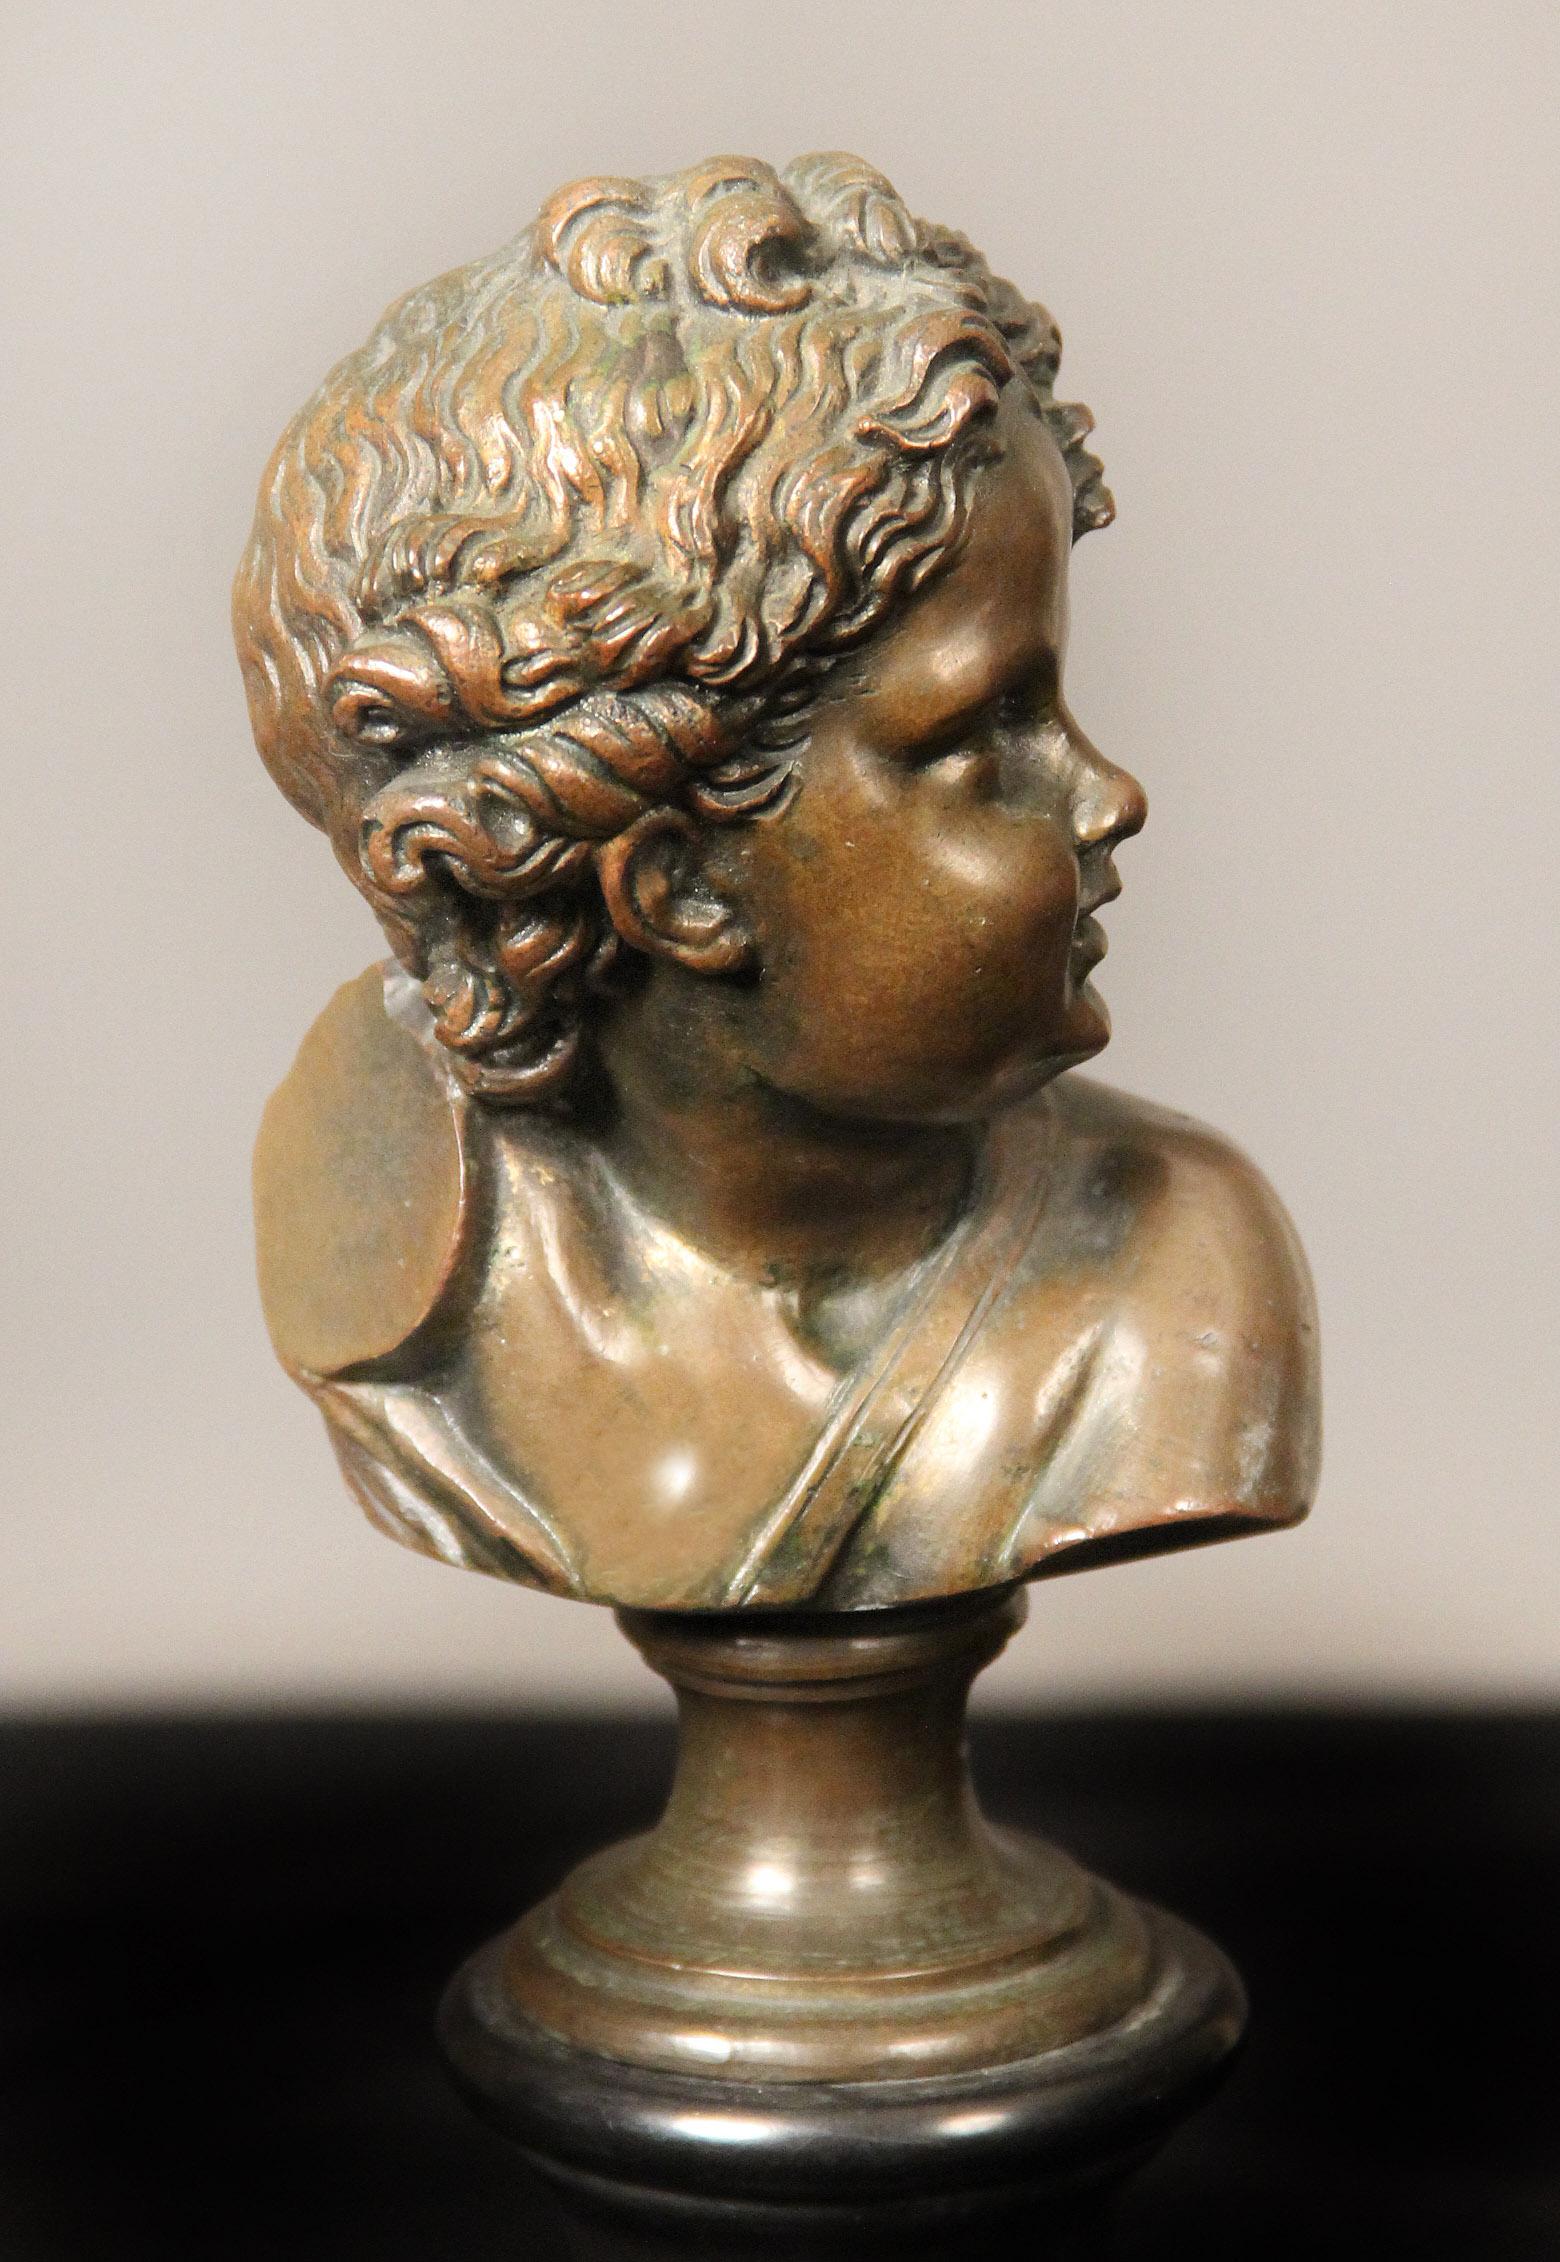 A pair of late 19th century bronze busts

By A. Mahuex

Depicting busts of young boys sitting on a black marble base.